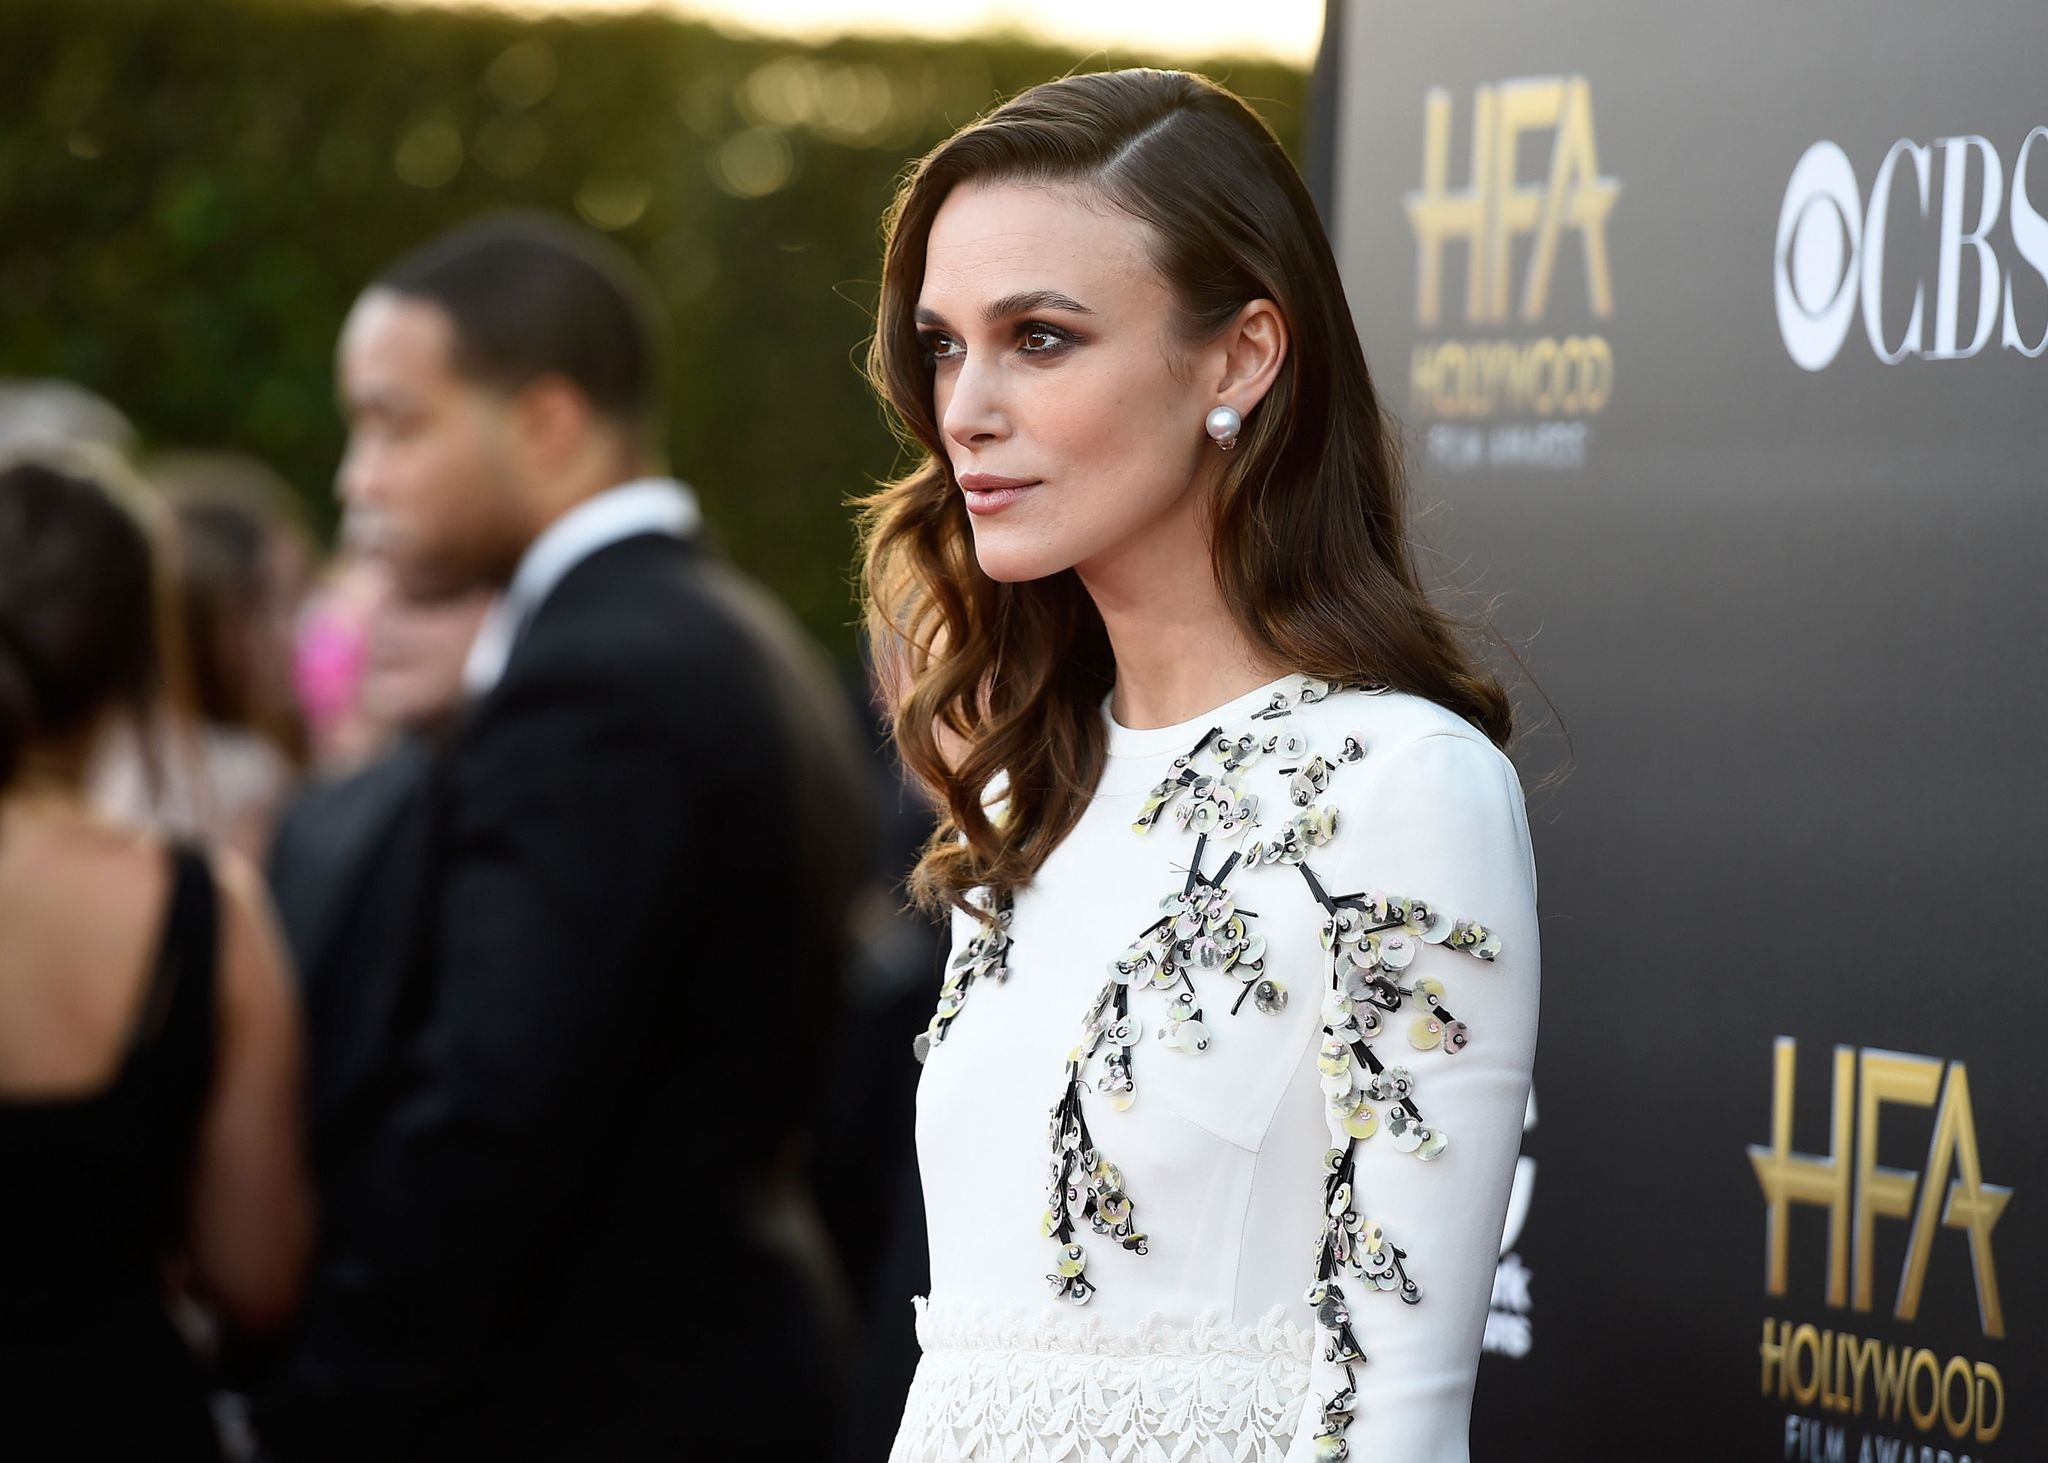 Keira Knightley speaks about suffering from PTSD